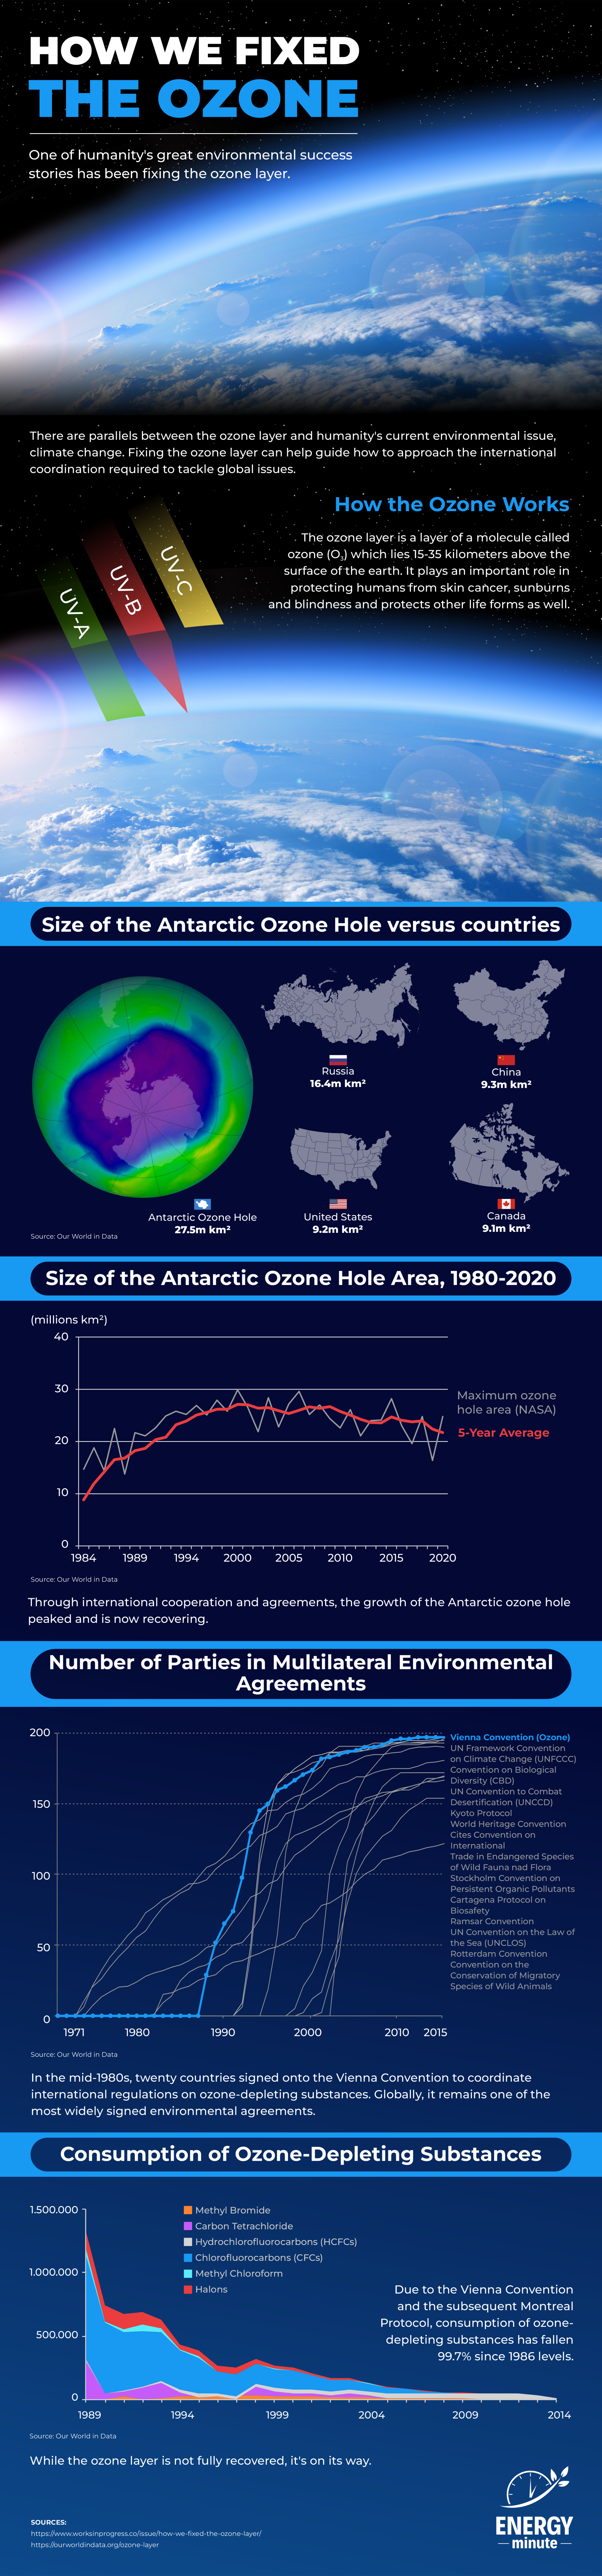 How we fixed the ozone layer